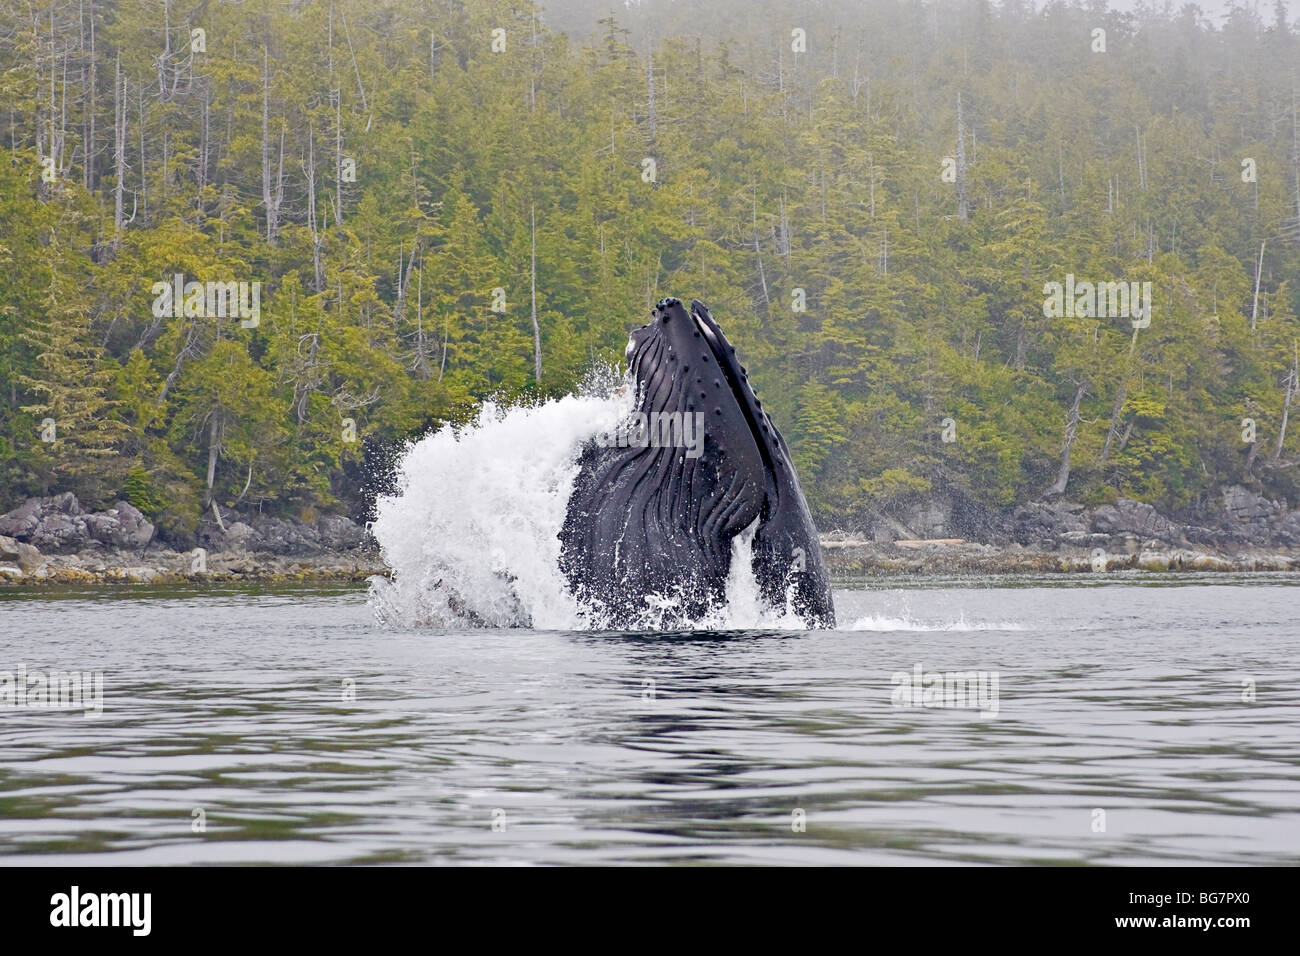 30 ton humpback whale (Megaptera, novaeangliae) jumps from water while feeding on small baitfish off Vancouver Island, Canada Stock Photo